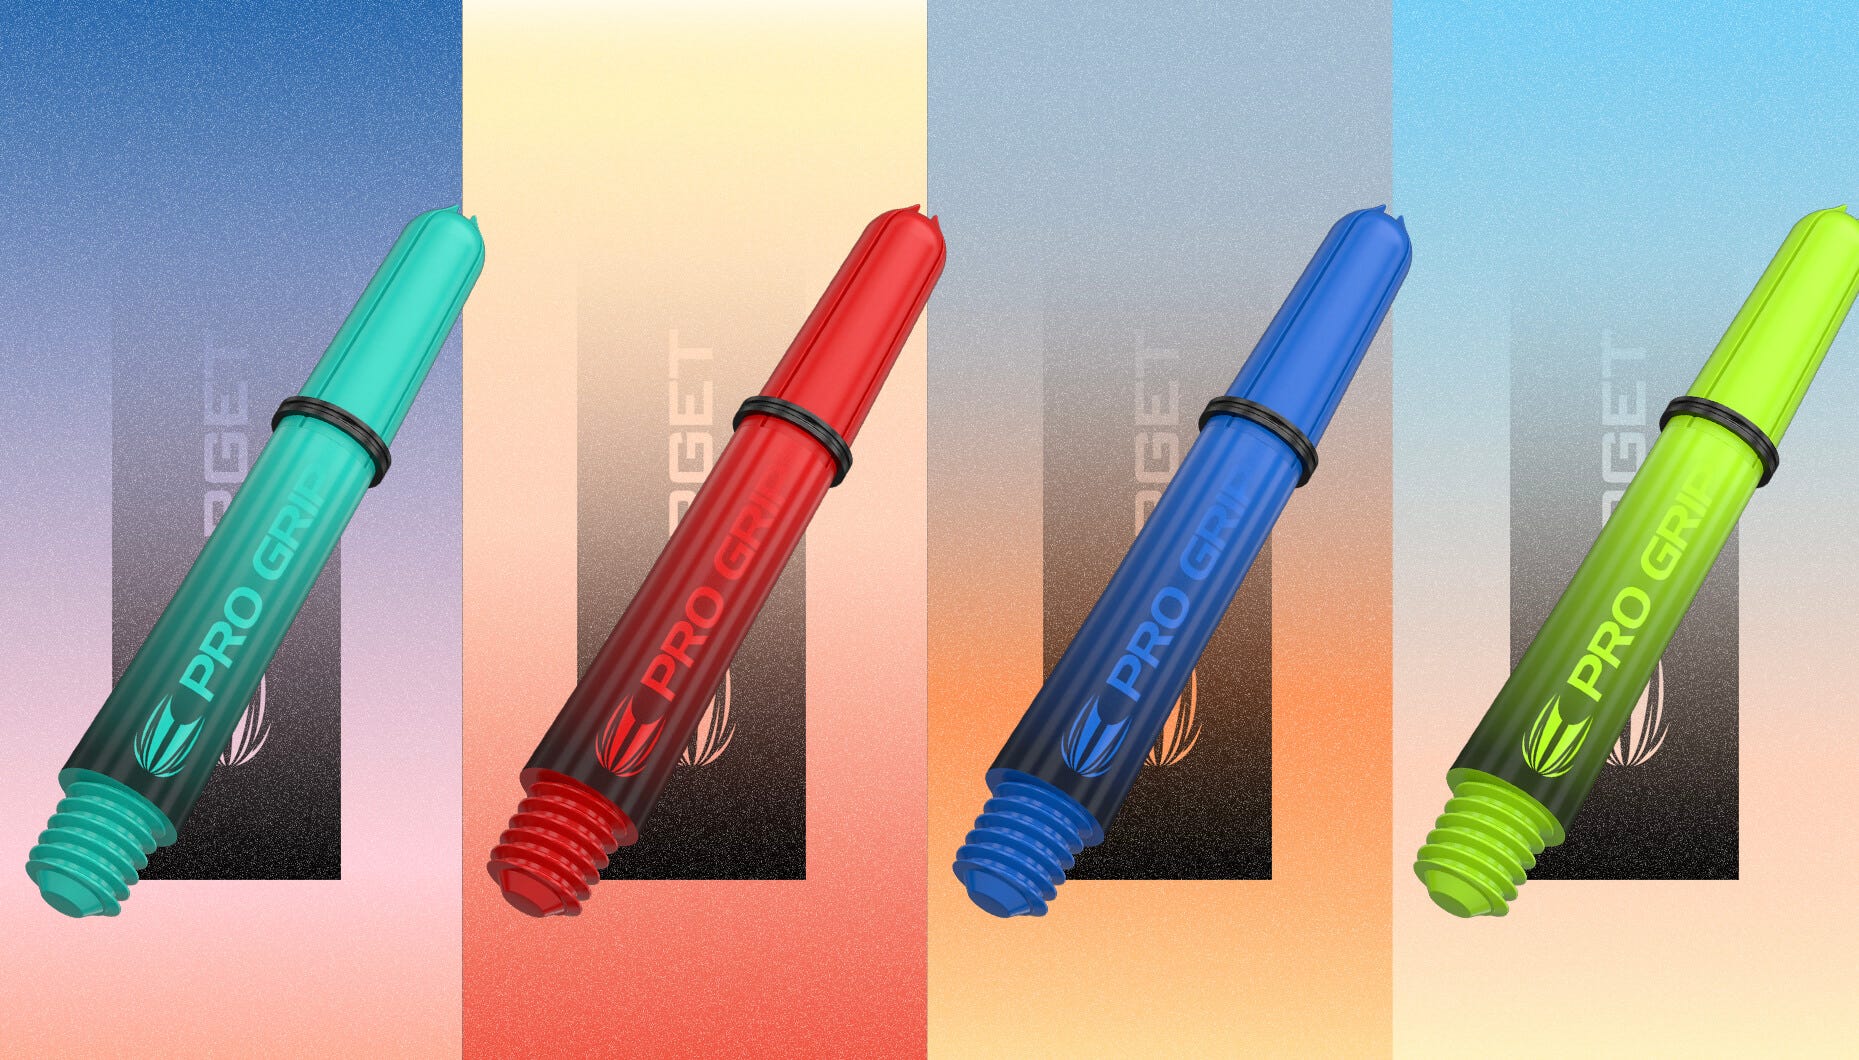 The new Dart Shafts from the Sera range available in Aqua, Red, Blue, and Green colours